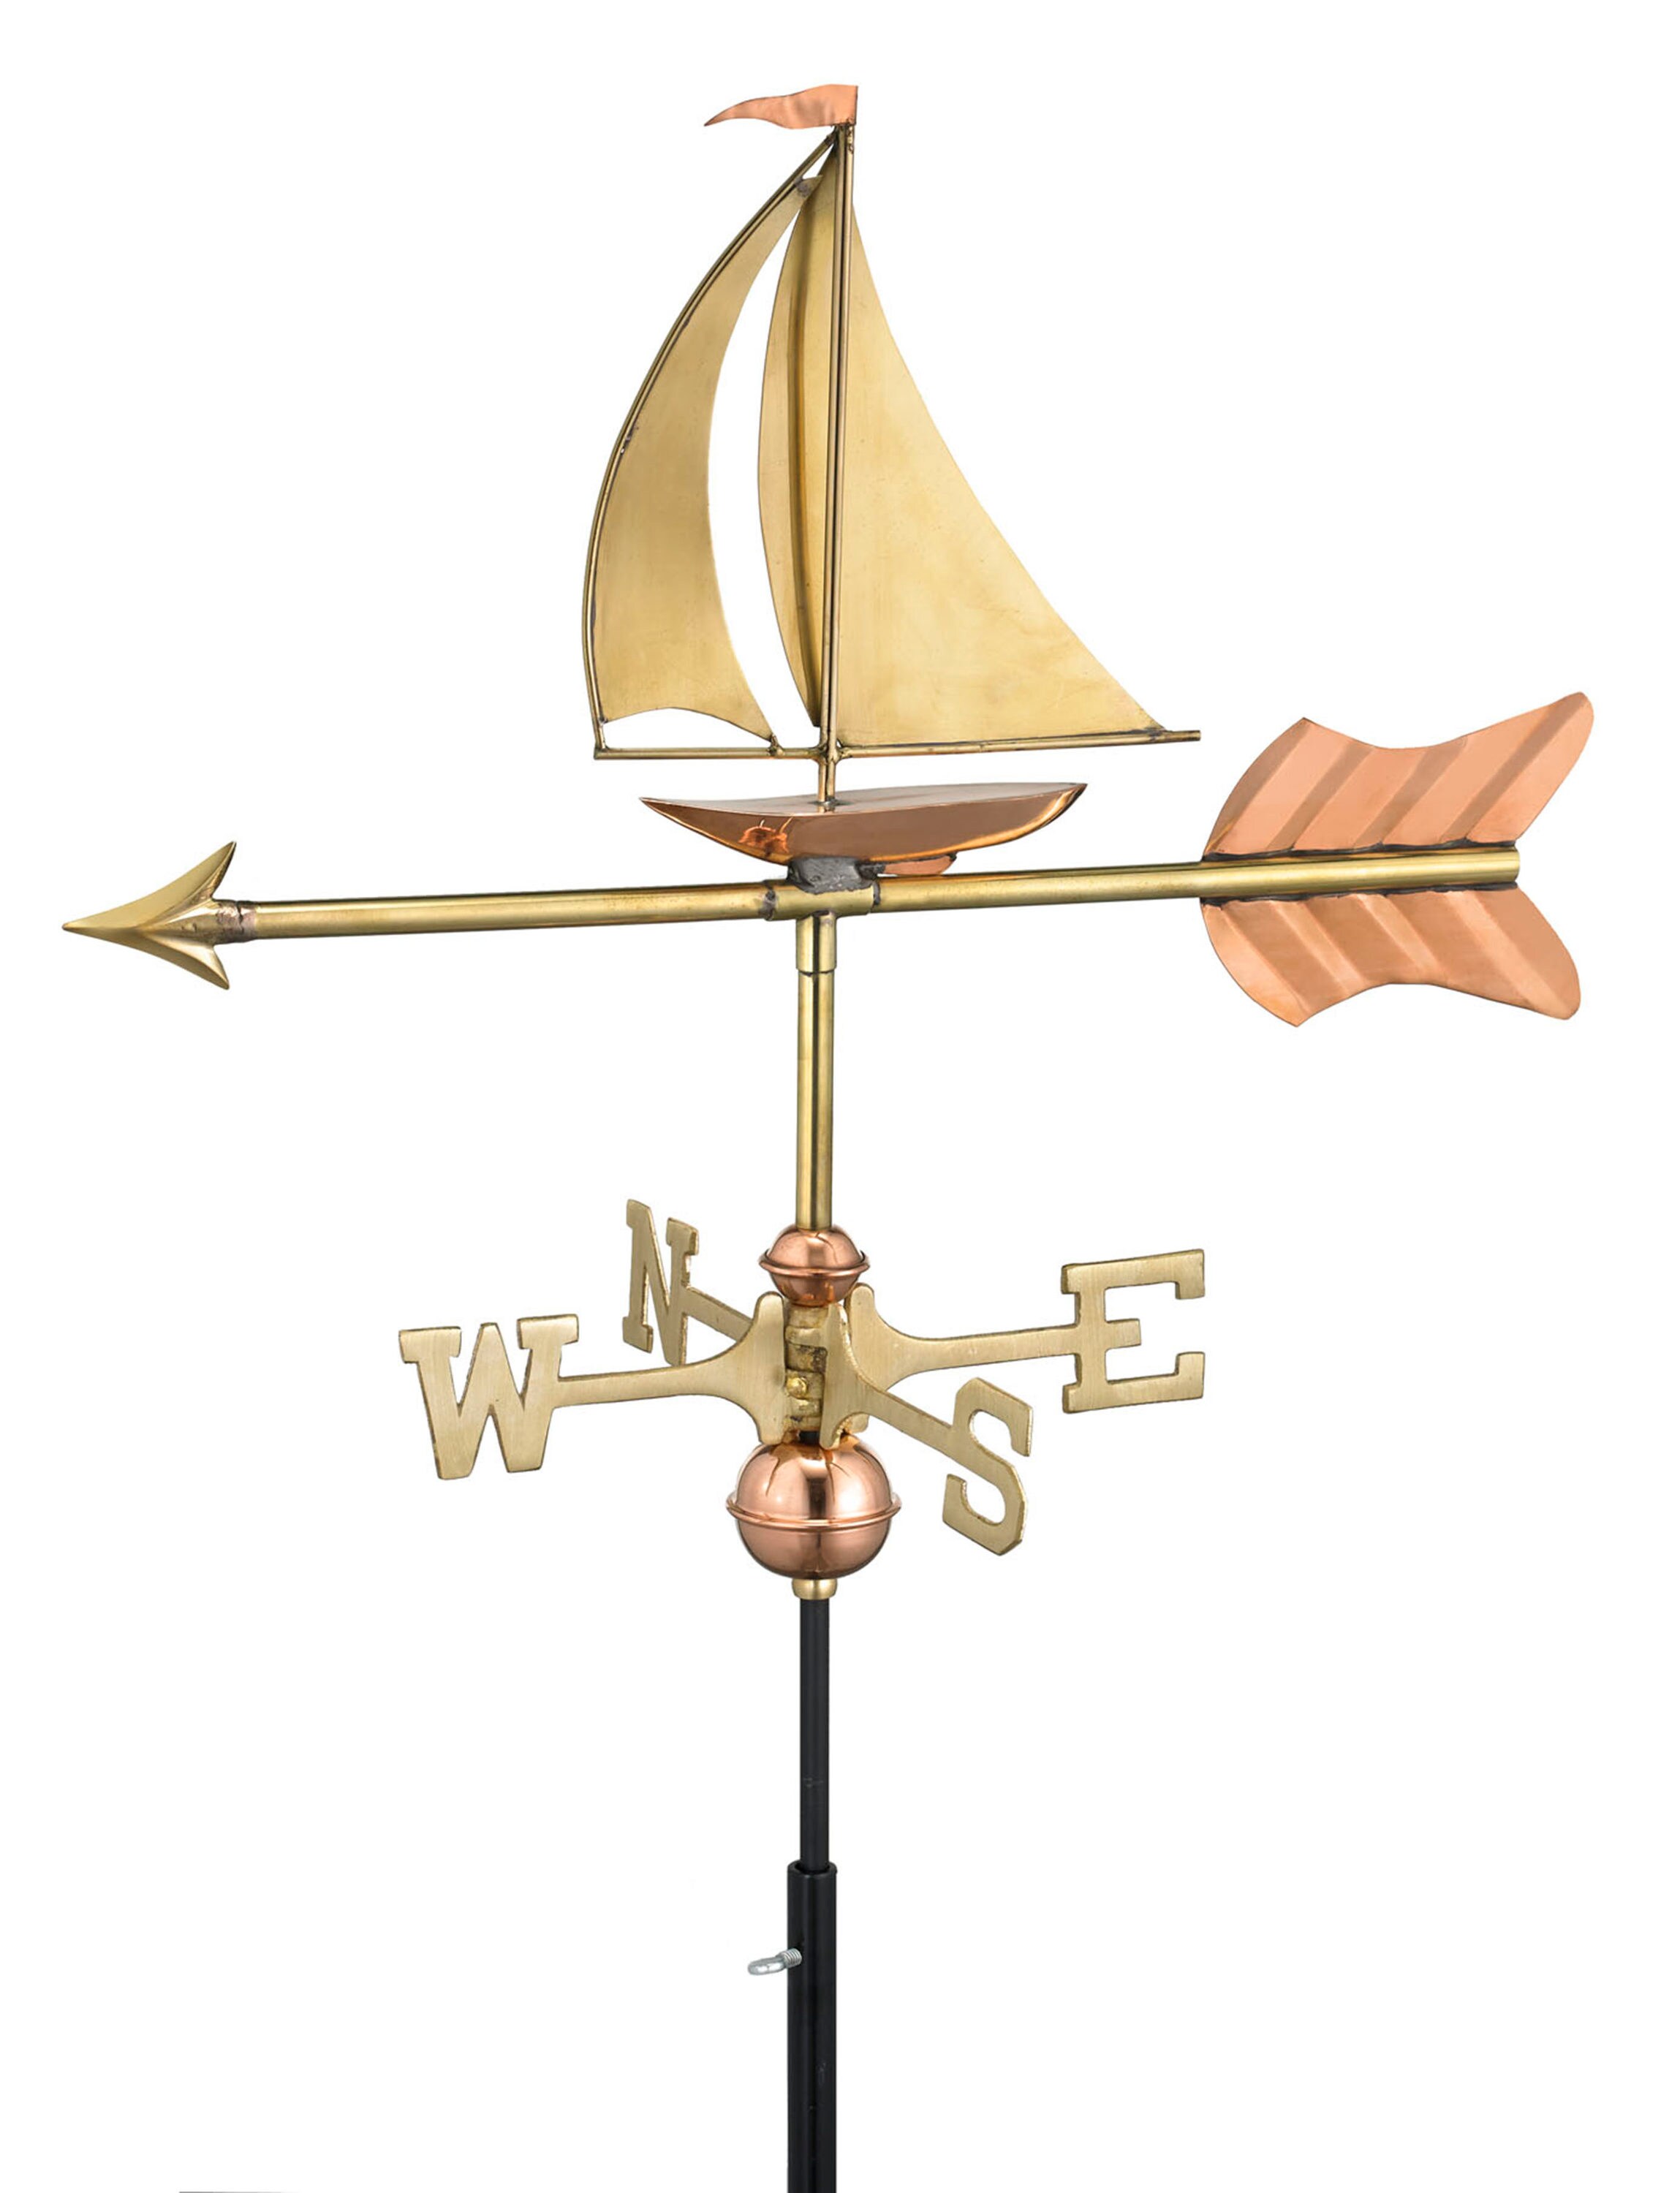 Details about   Beautiful copper/brass SAILboat weathervane TOP ONLY FITS over a 3/8''  top rod 